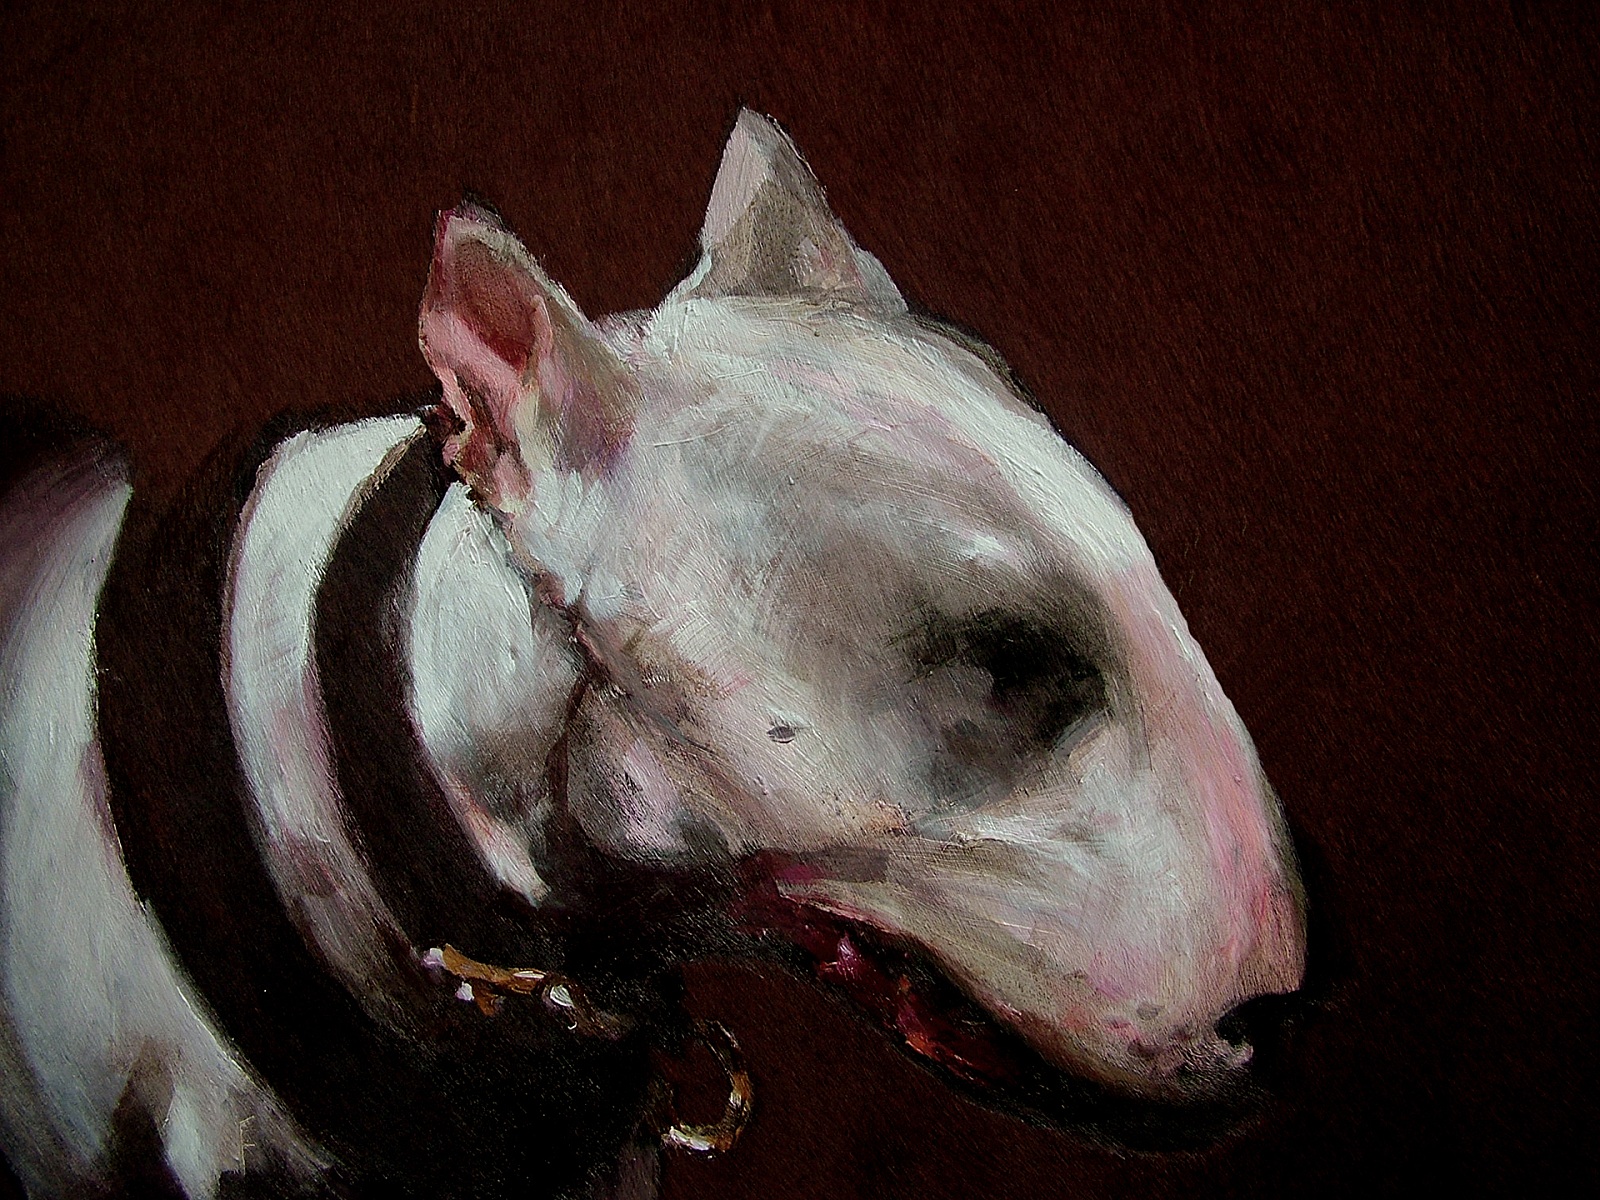 White Terrier - 2020, oil on fur, 200 x 200cm,  private collection, RO - 11